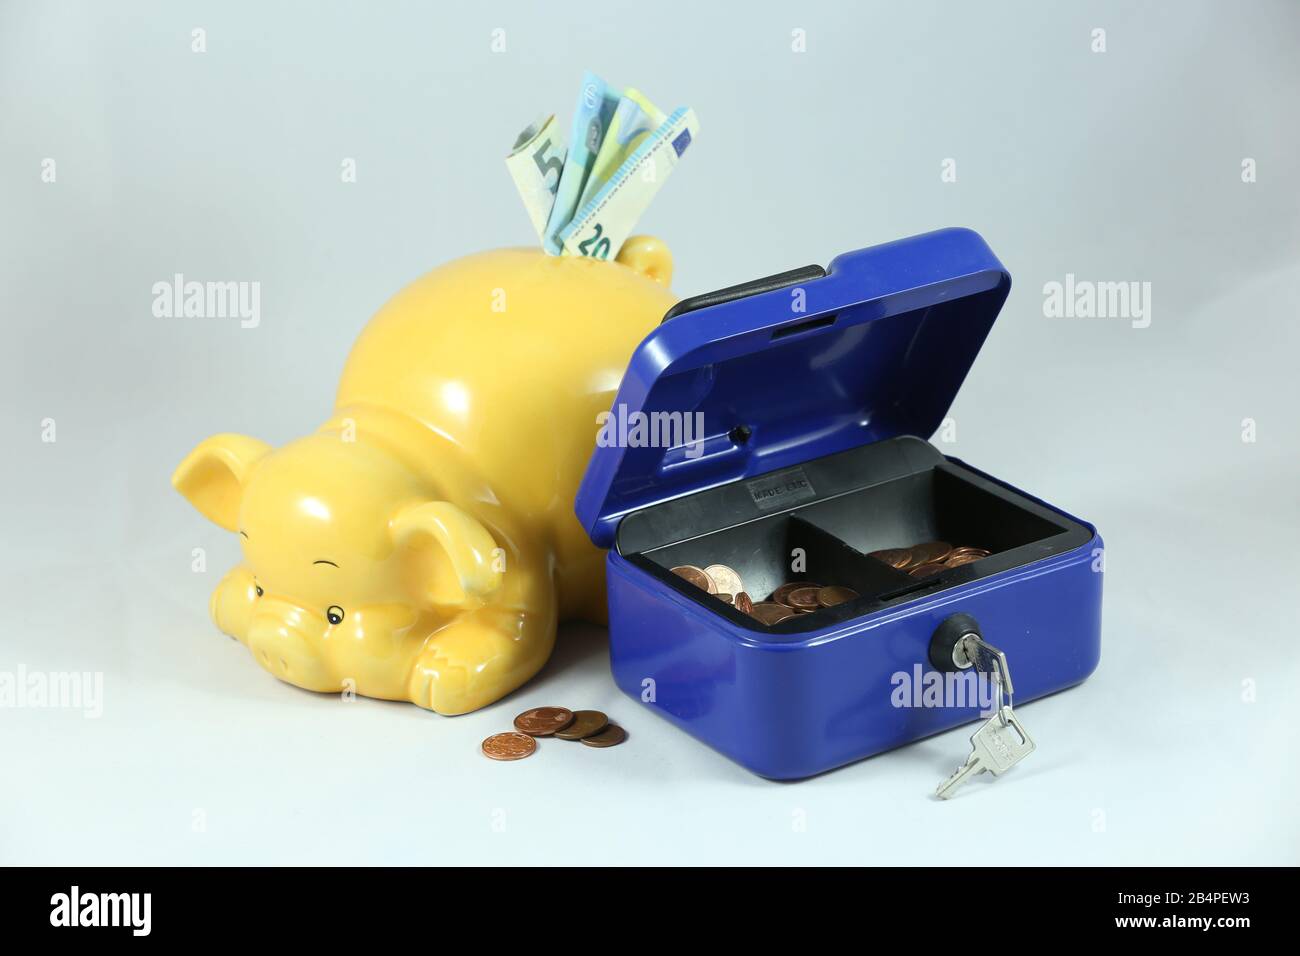 Yellow friendly piggy bank with money and blue cash box Stock Photo